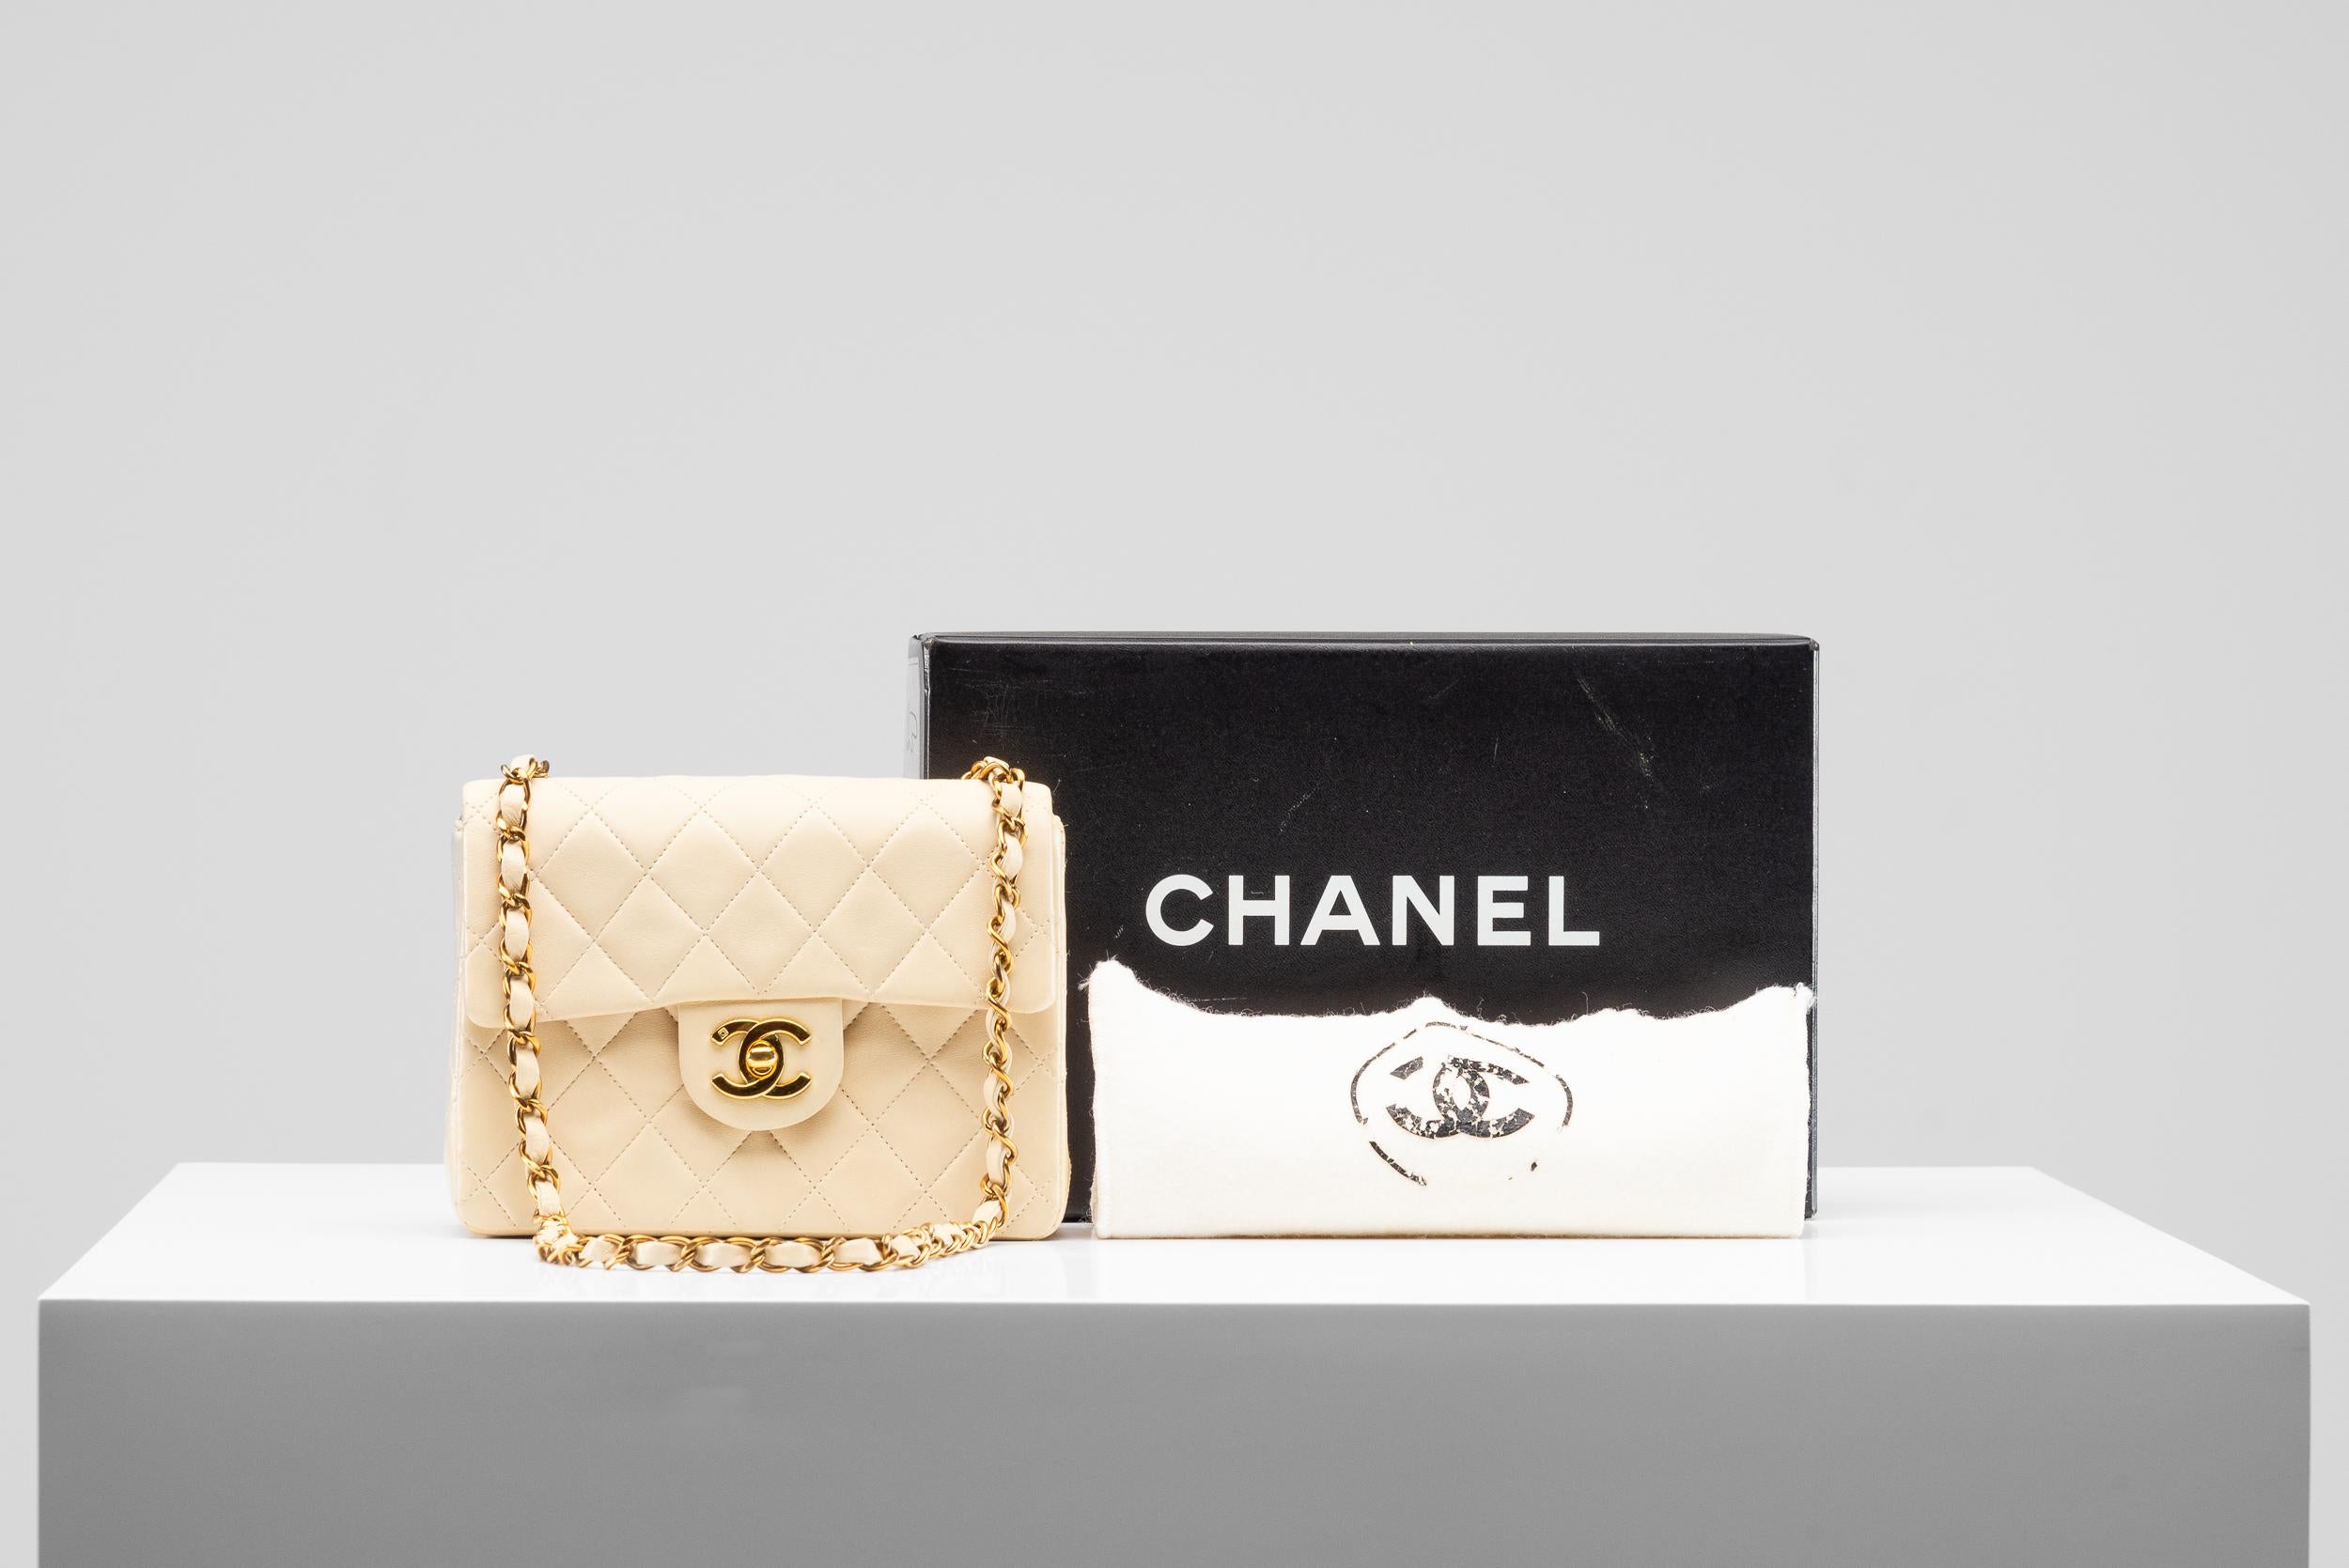 From the collection of SAVINETI we offer this Chanel Mini Square Flap bag:
- Brand: Chanel
- Model: Mini Square Flap
- Year: 1994-1996
- Code: 3049285
- Condition: Good 
- Materials: lambskin leather, 24k gold-plated hardware
- Extras: Hologram,